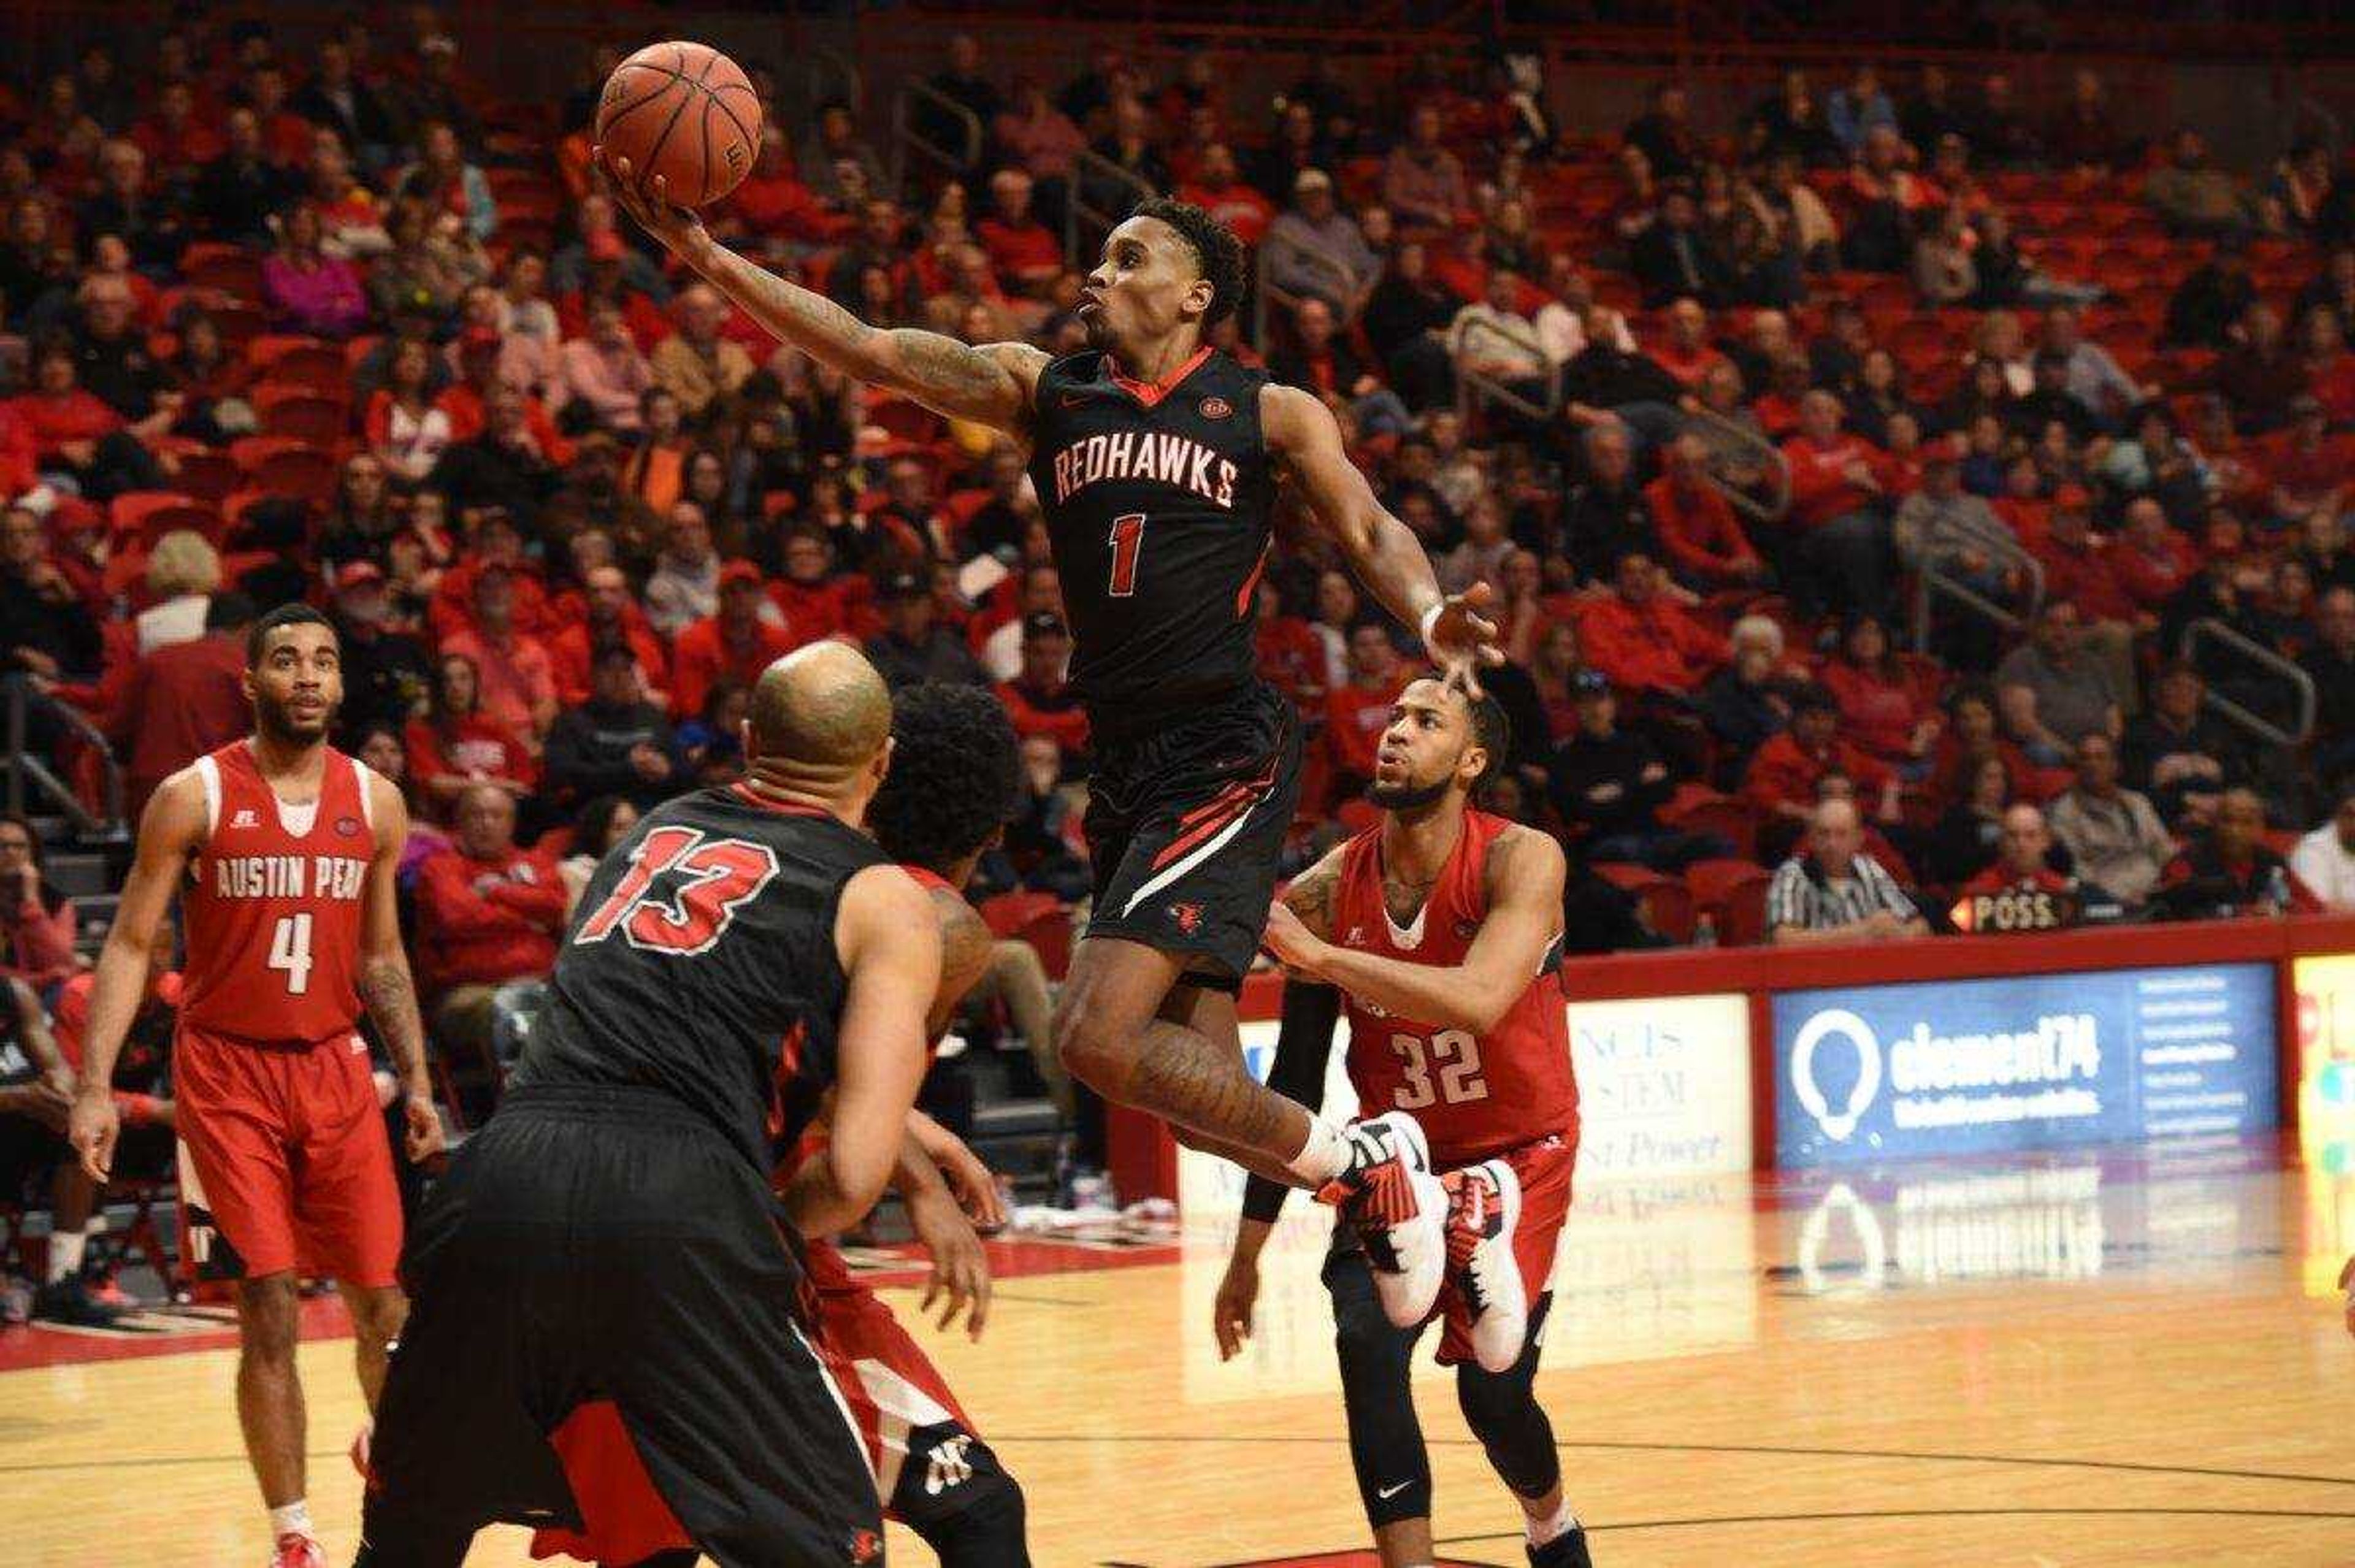 Men's basketball holds fifth seed in OVC tournament